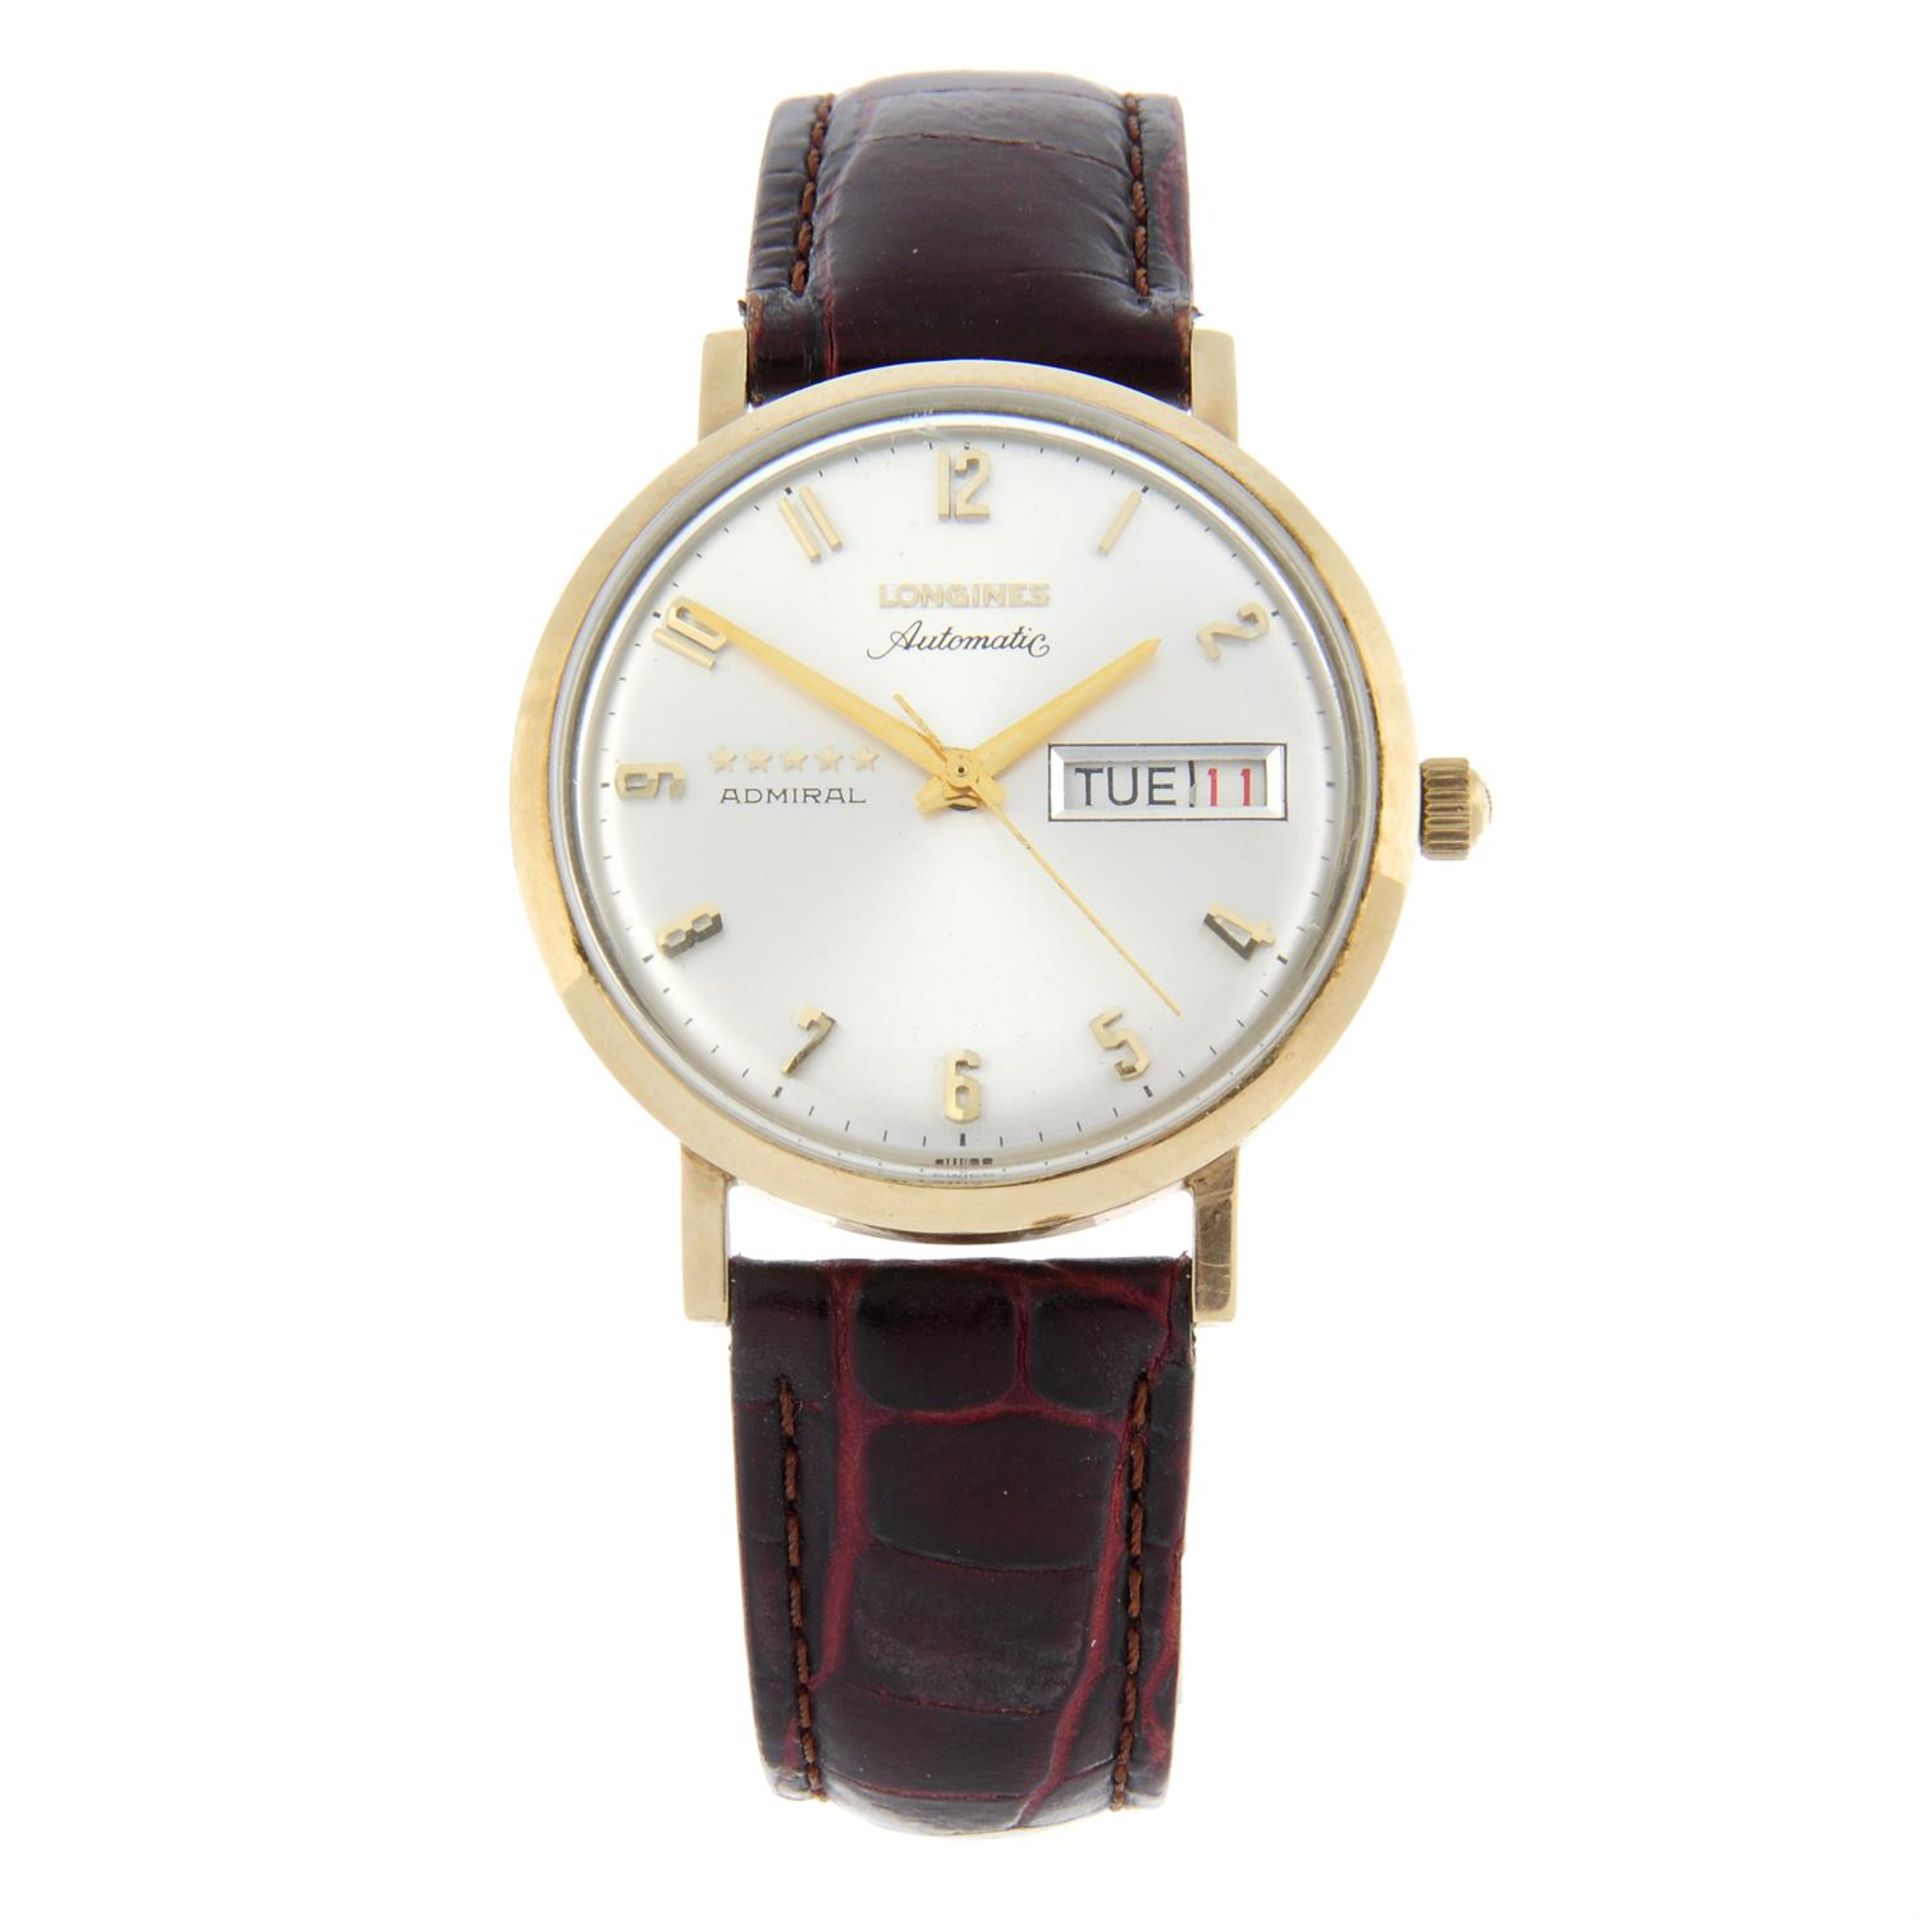 LONGINES - a gold plated Admiral wrist watch, 34mm.